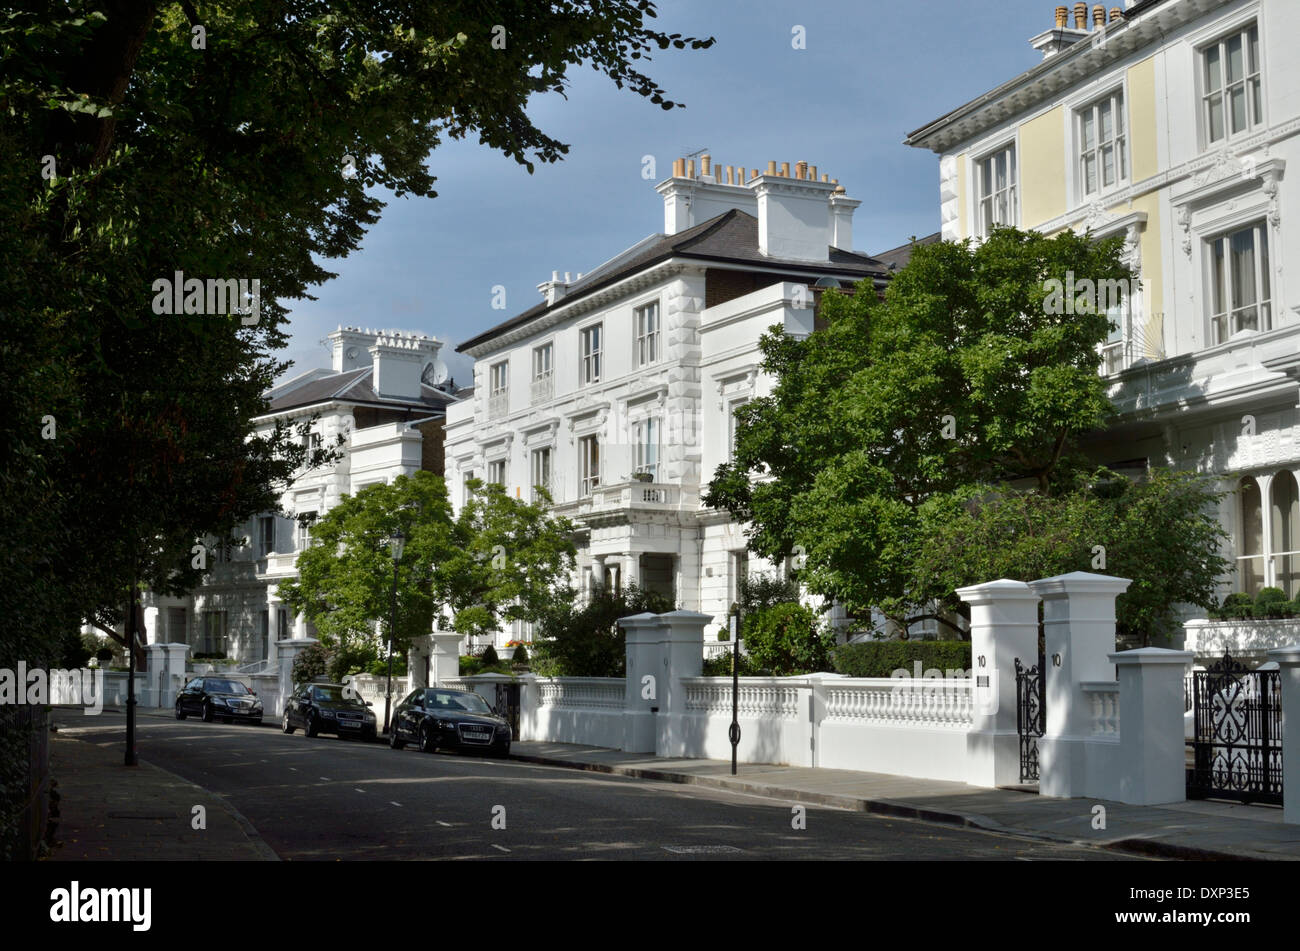 The Boltons SW10, Fulham, London, UK. Stock Photo